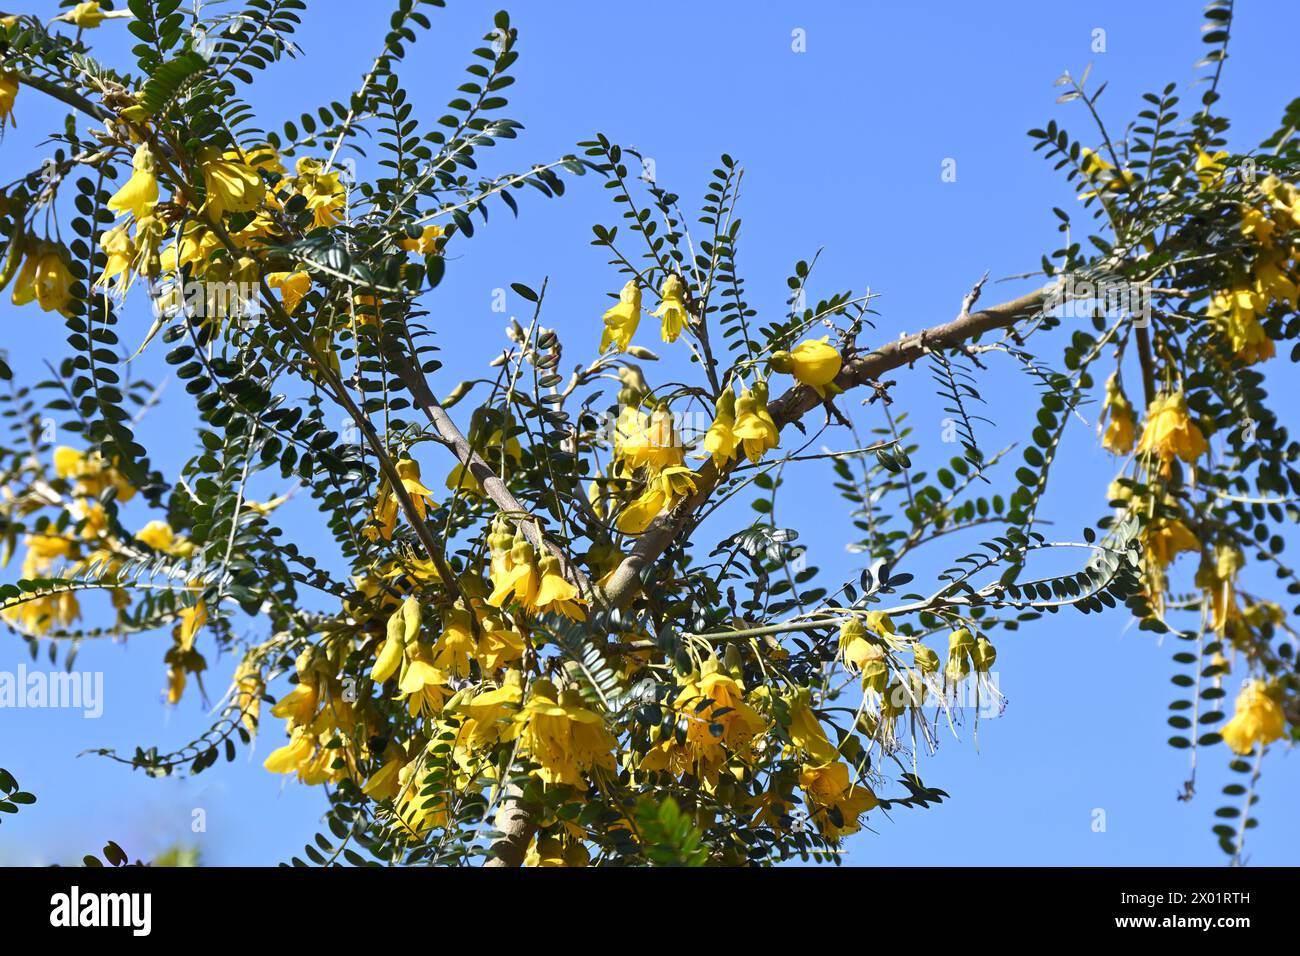 Bright yellow spring flowers of evergreen shrub Kōwhai also known as Sophora microphylla growing against clear blue sky in UK garden March Stock Photo